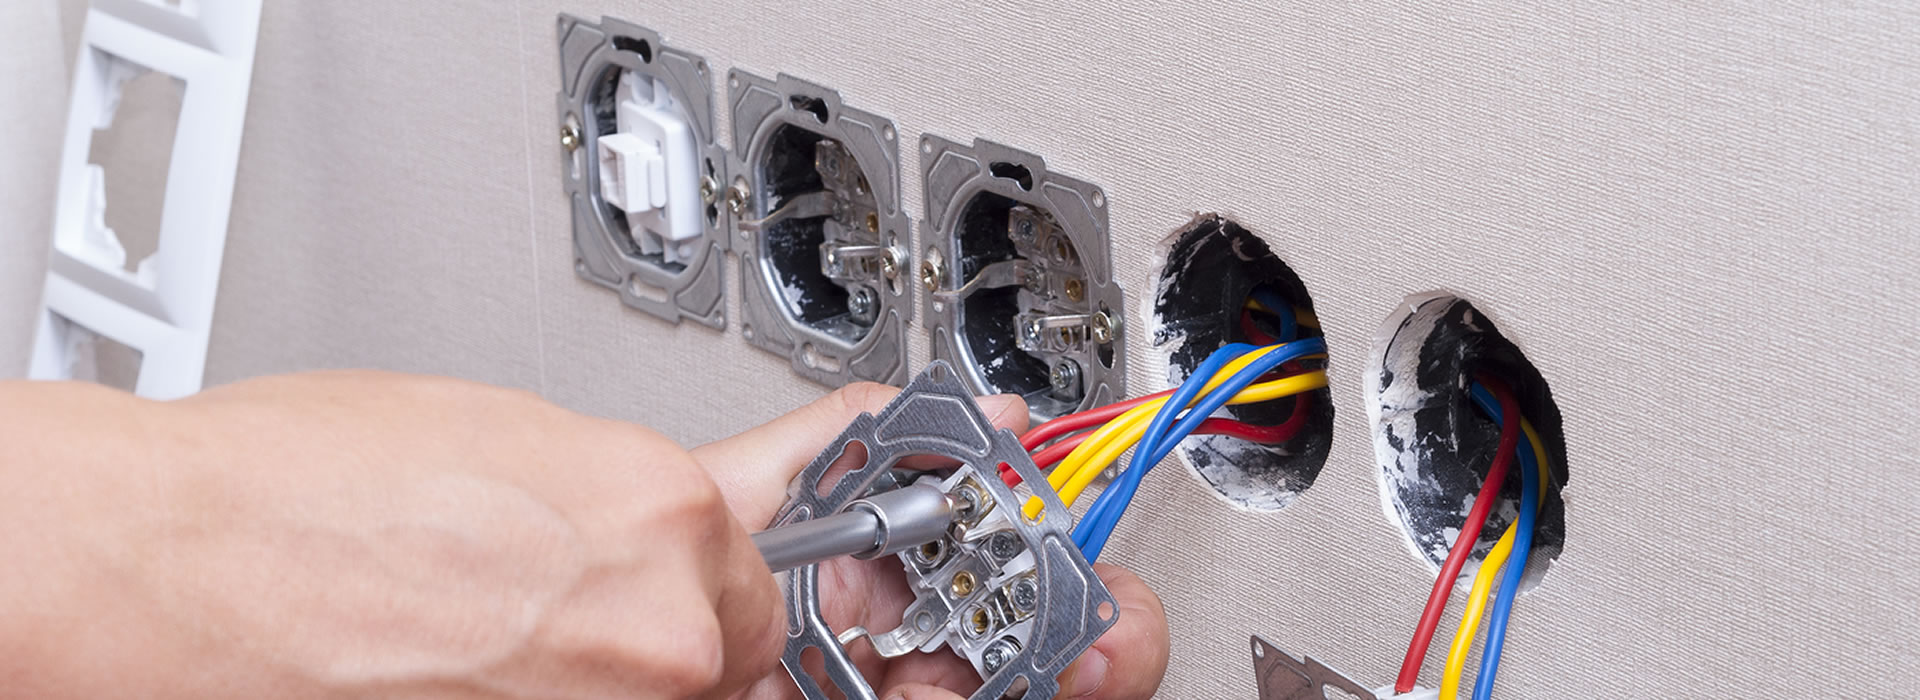 Electrical Outlet Replacement in Babylon, NY